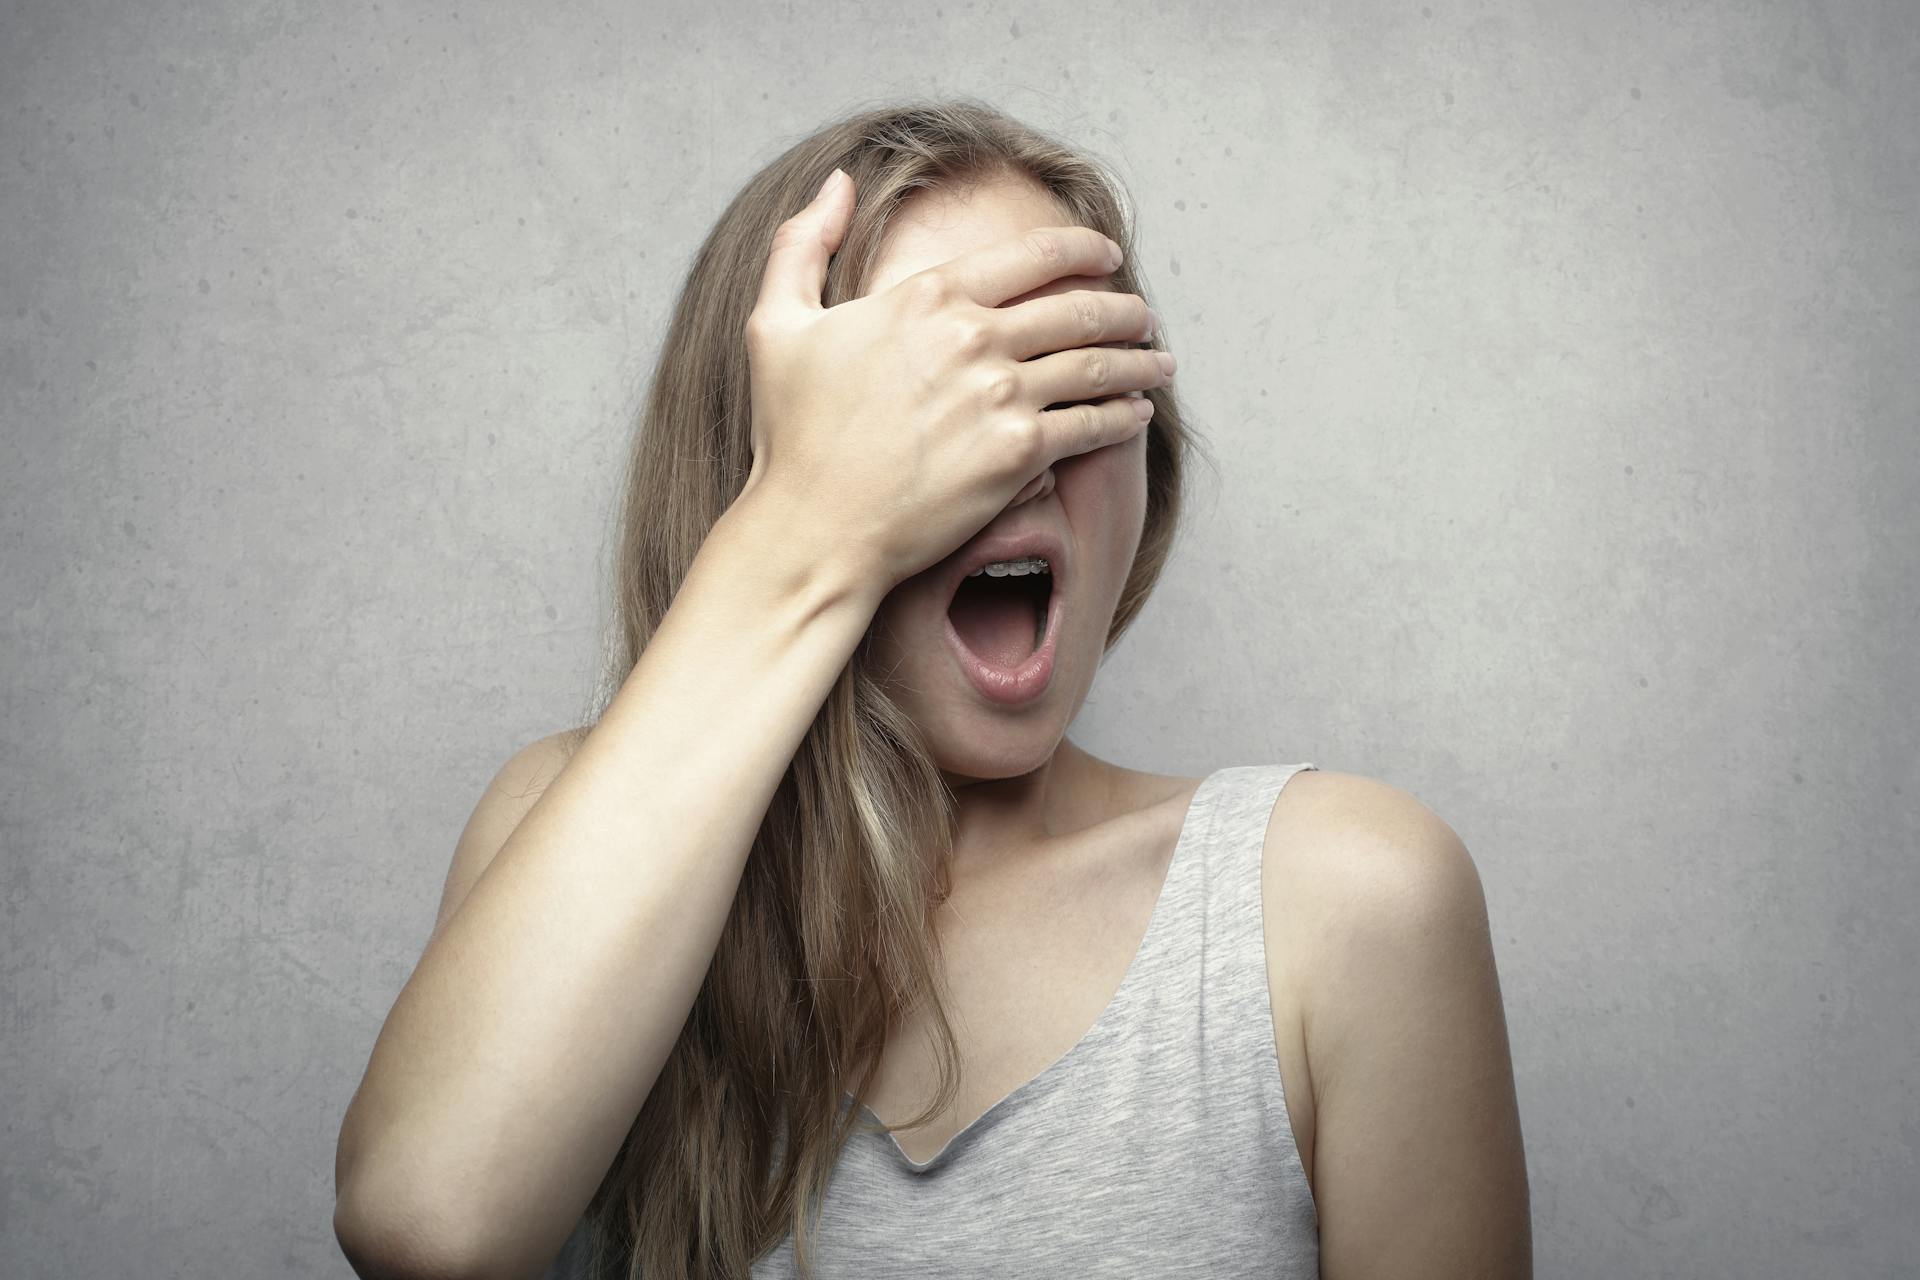 A shocked woman covering her eyes with one hand | Source: Pexels